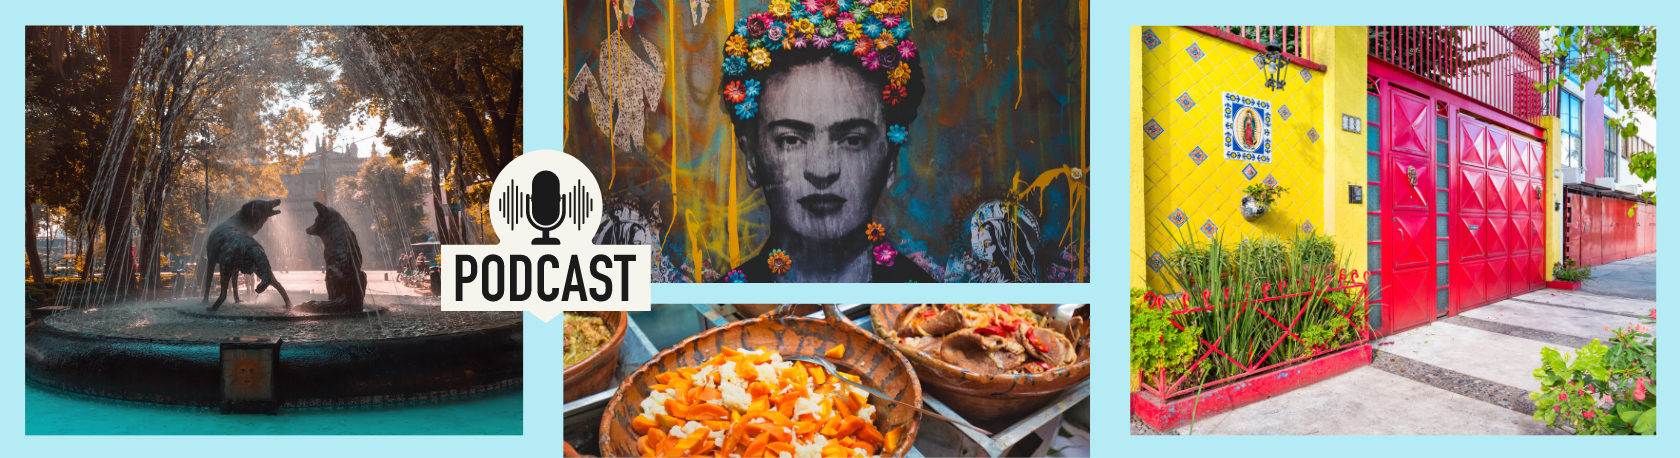 Discover the magical Mexican neighborhood of Coyoacán while improving your Spanish listening skills